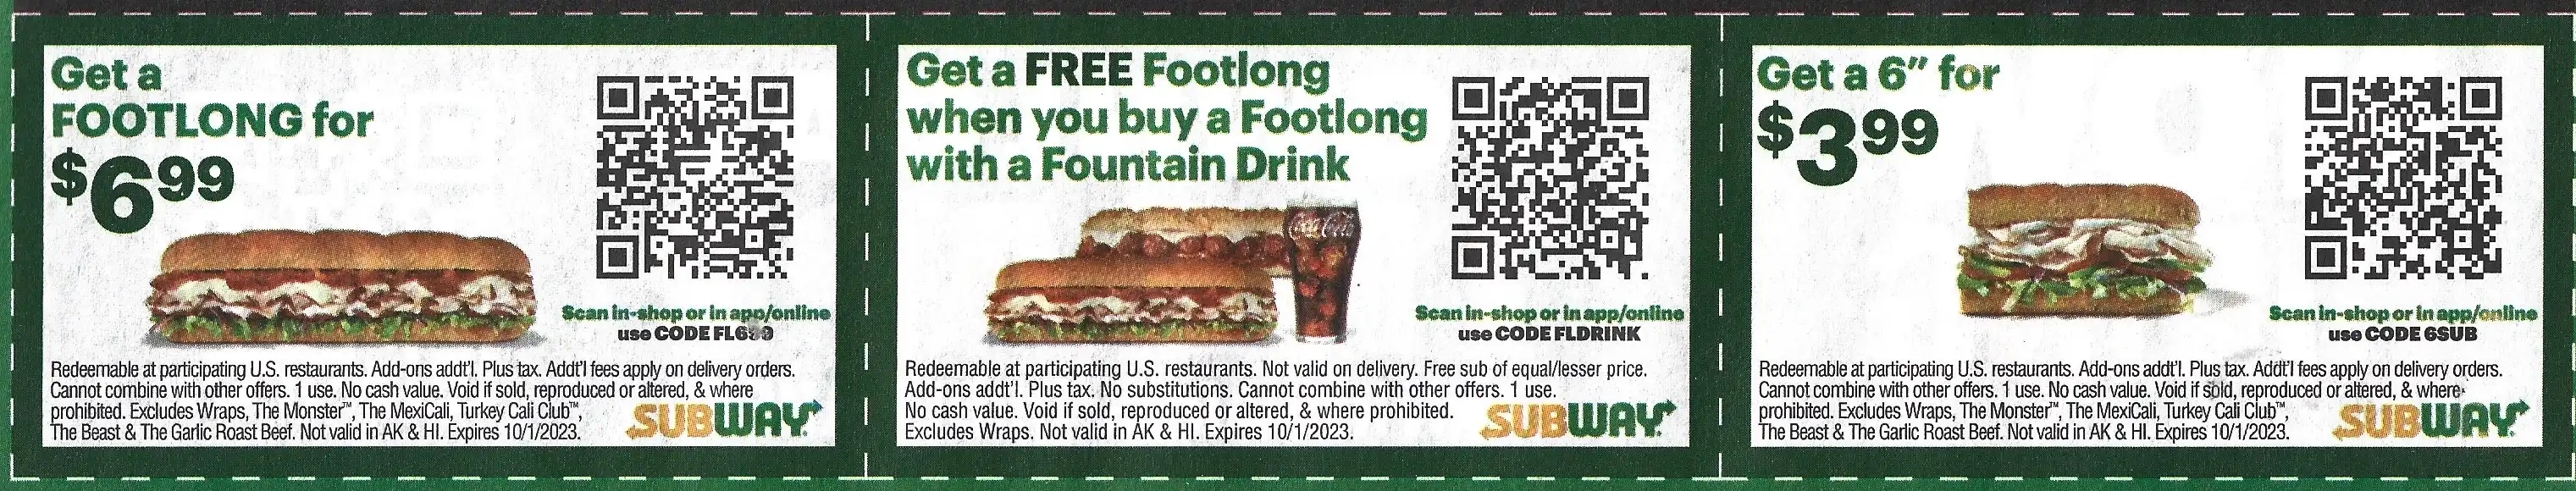 Subway Printable Store Coupons QR Codes - Expires 10/01/2023